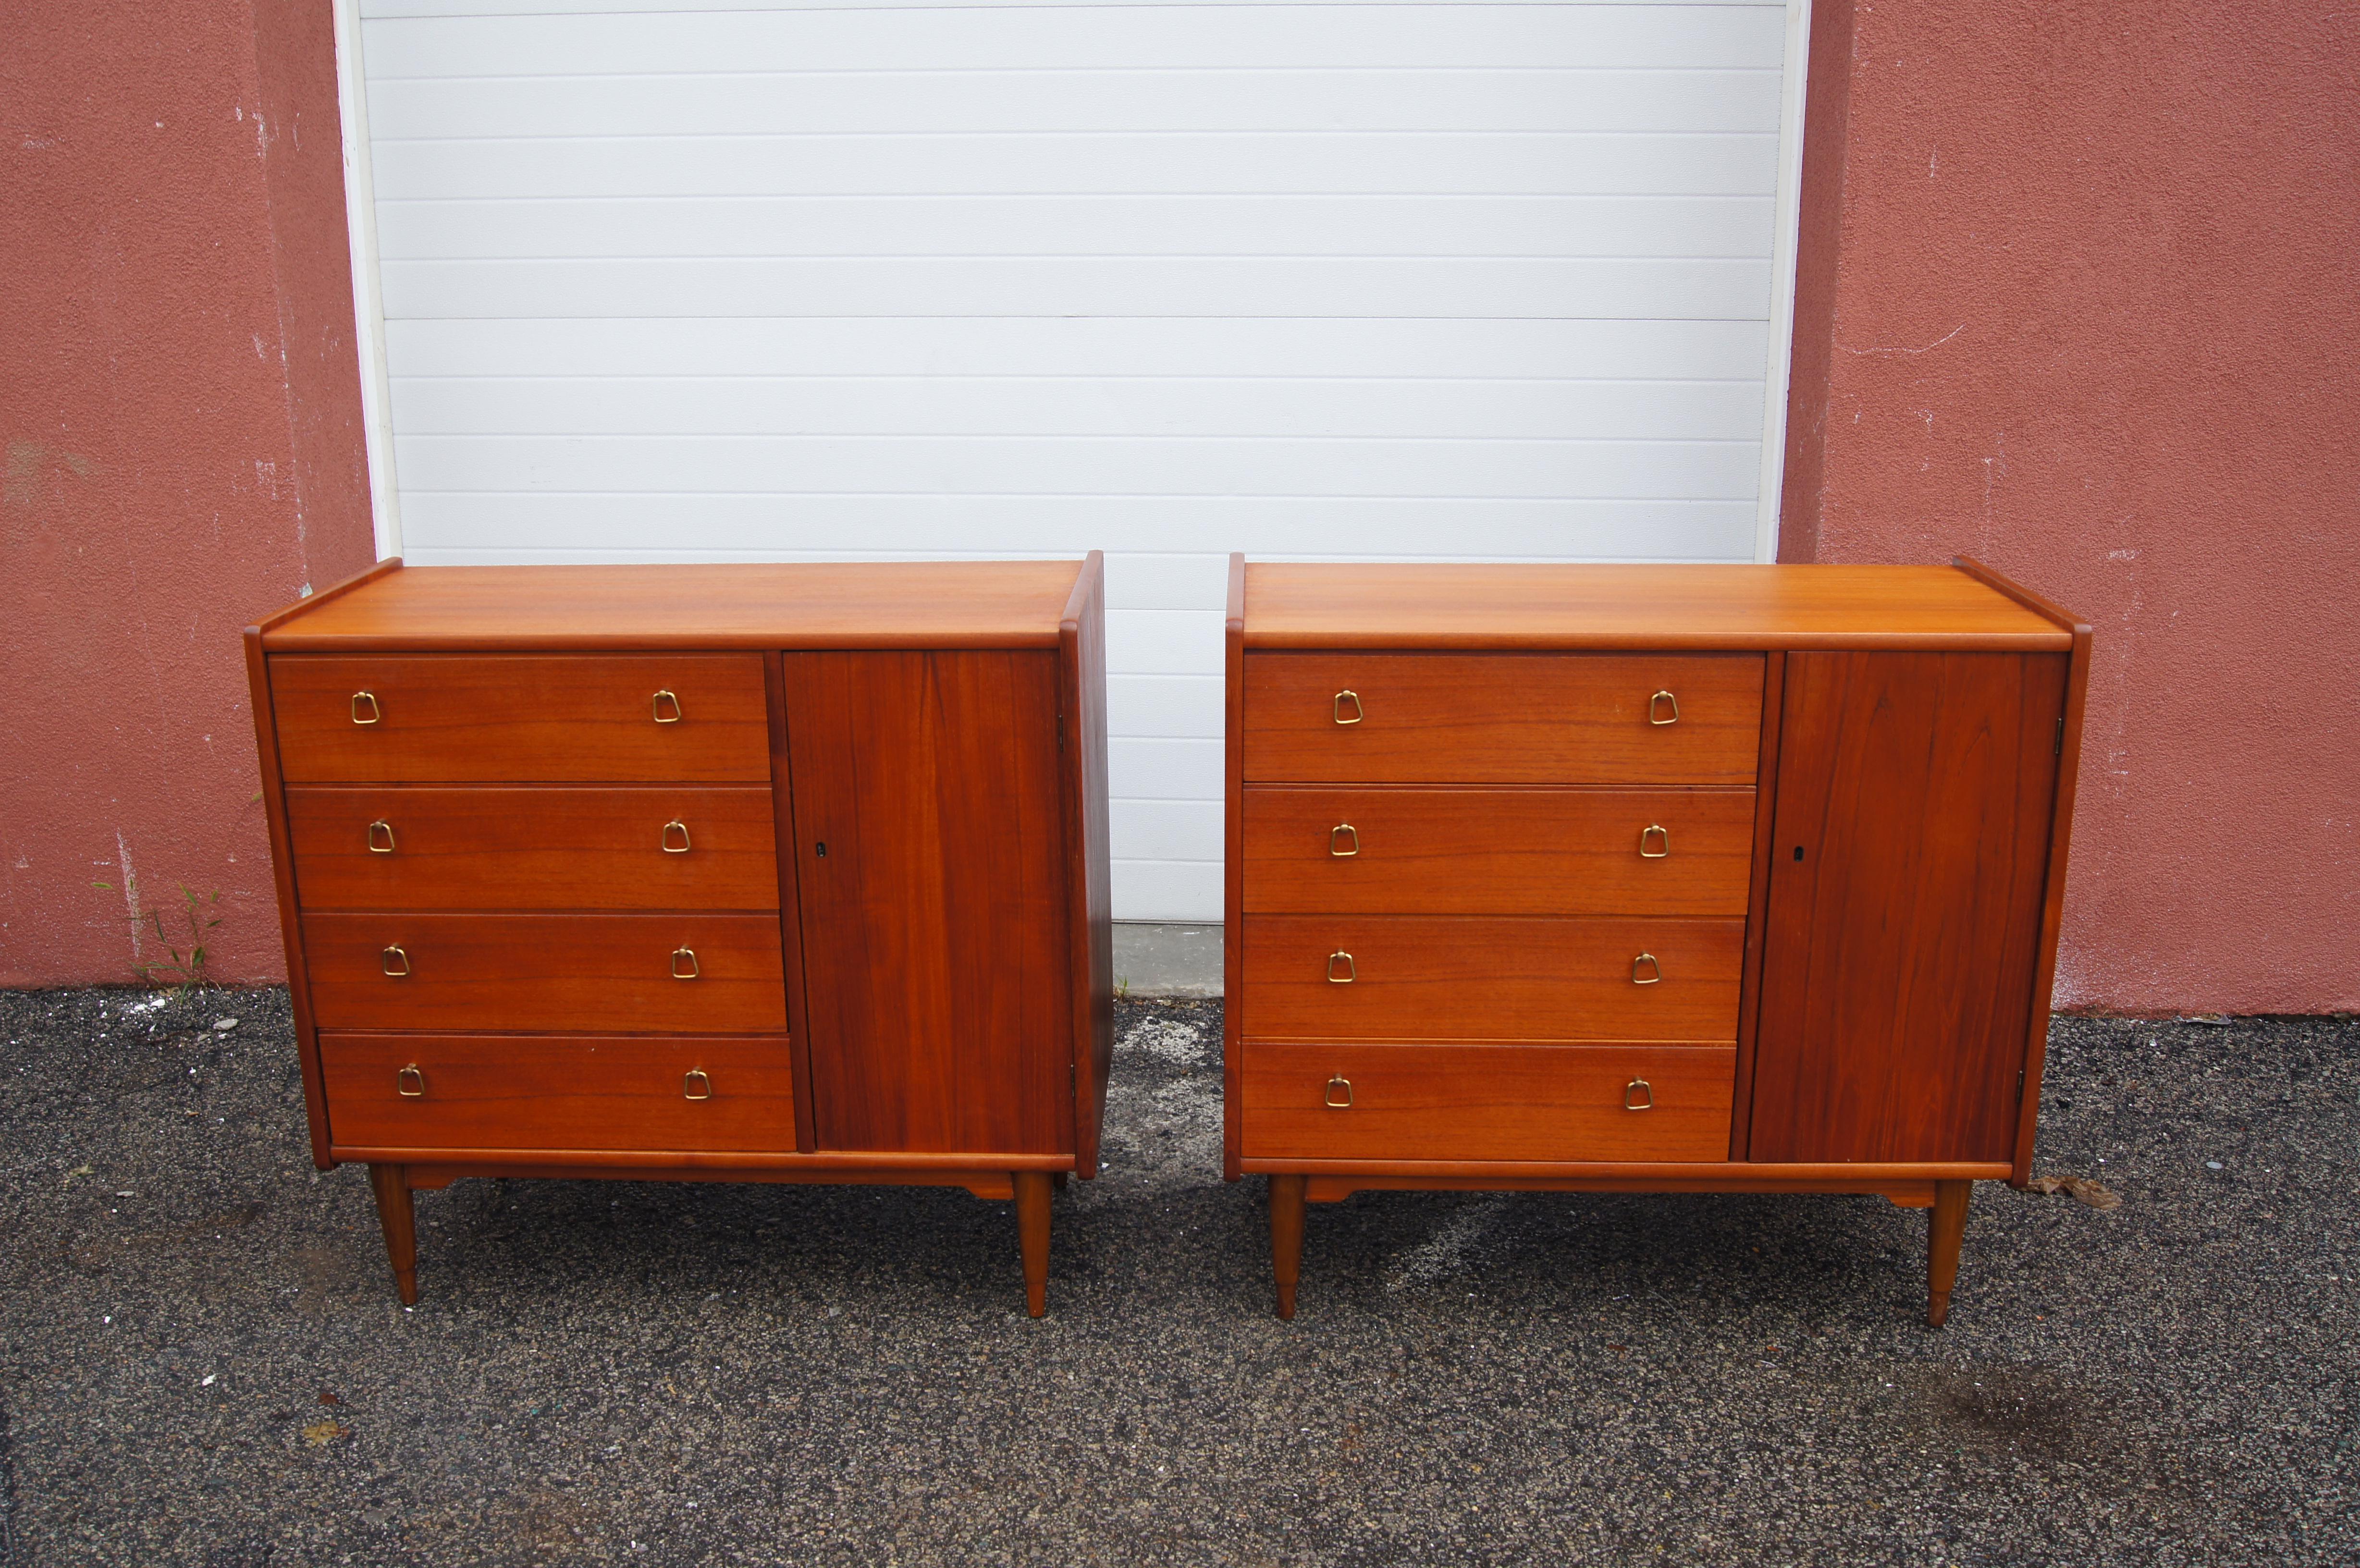 Made by the Norwegian furniture company Gjøvik Møbelfabriken, this dresser is a wonderful example of Scandinavian modern. Sitting on solid tapered legs, the teak case features a row of four deep drawers with brass drop pulls on the left and, behind